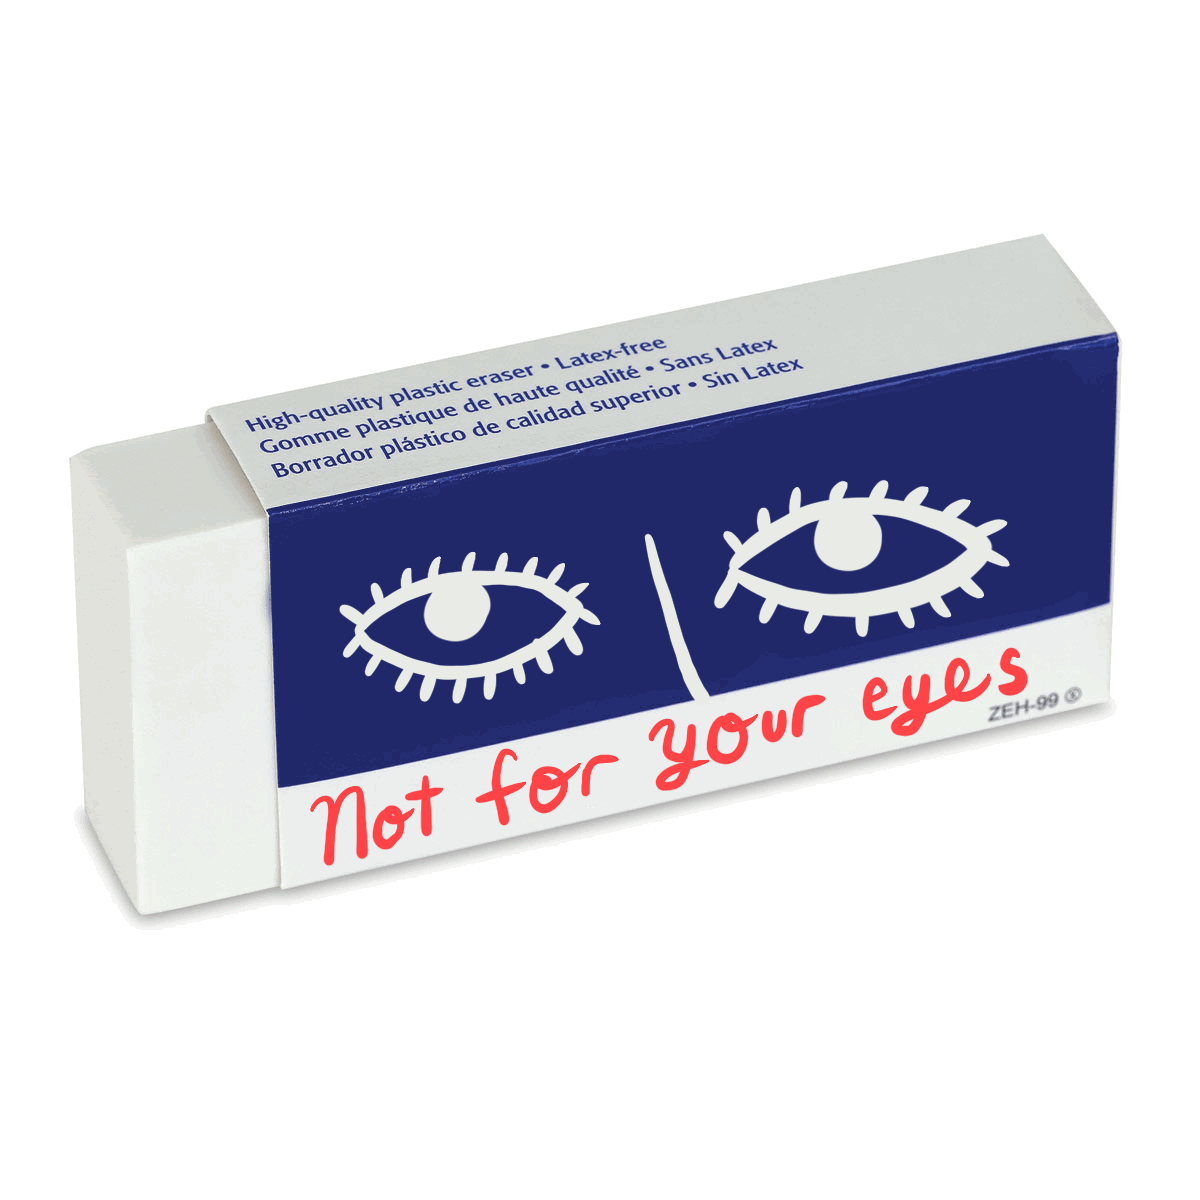 Eraser with animated eyes closing and text "Not for your eyes"